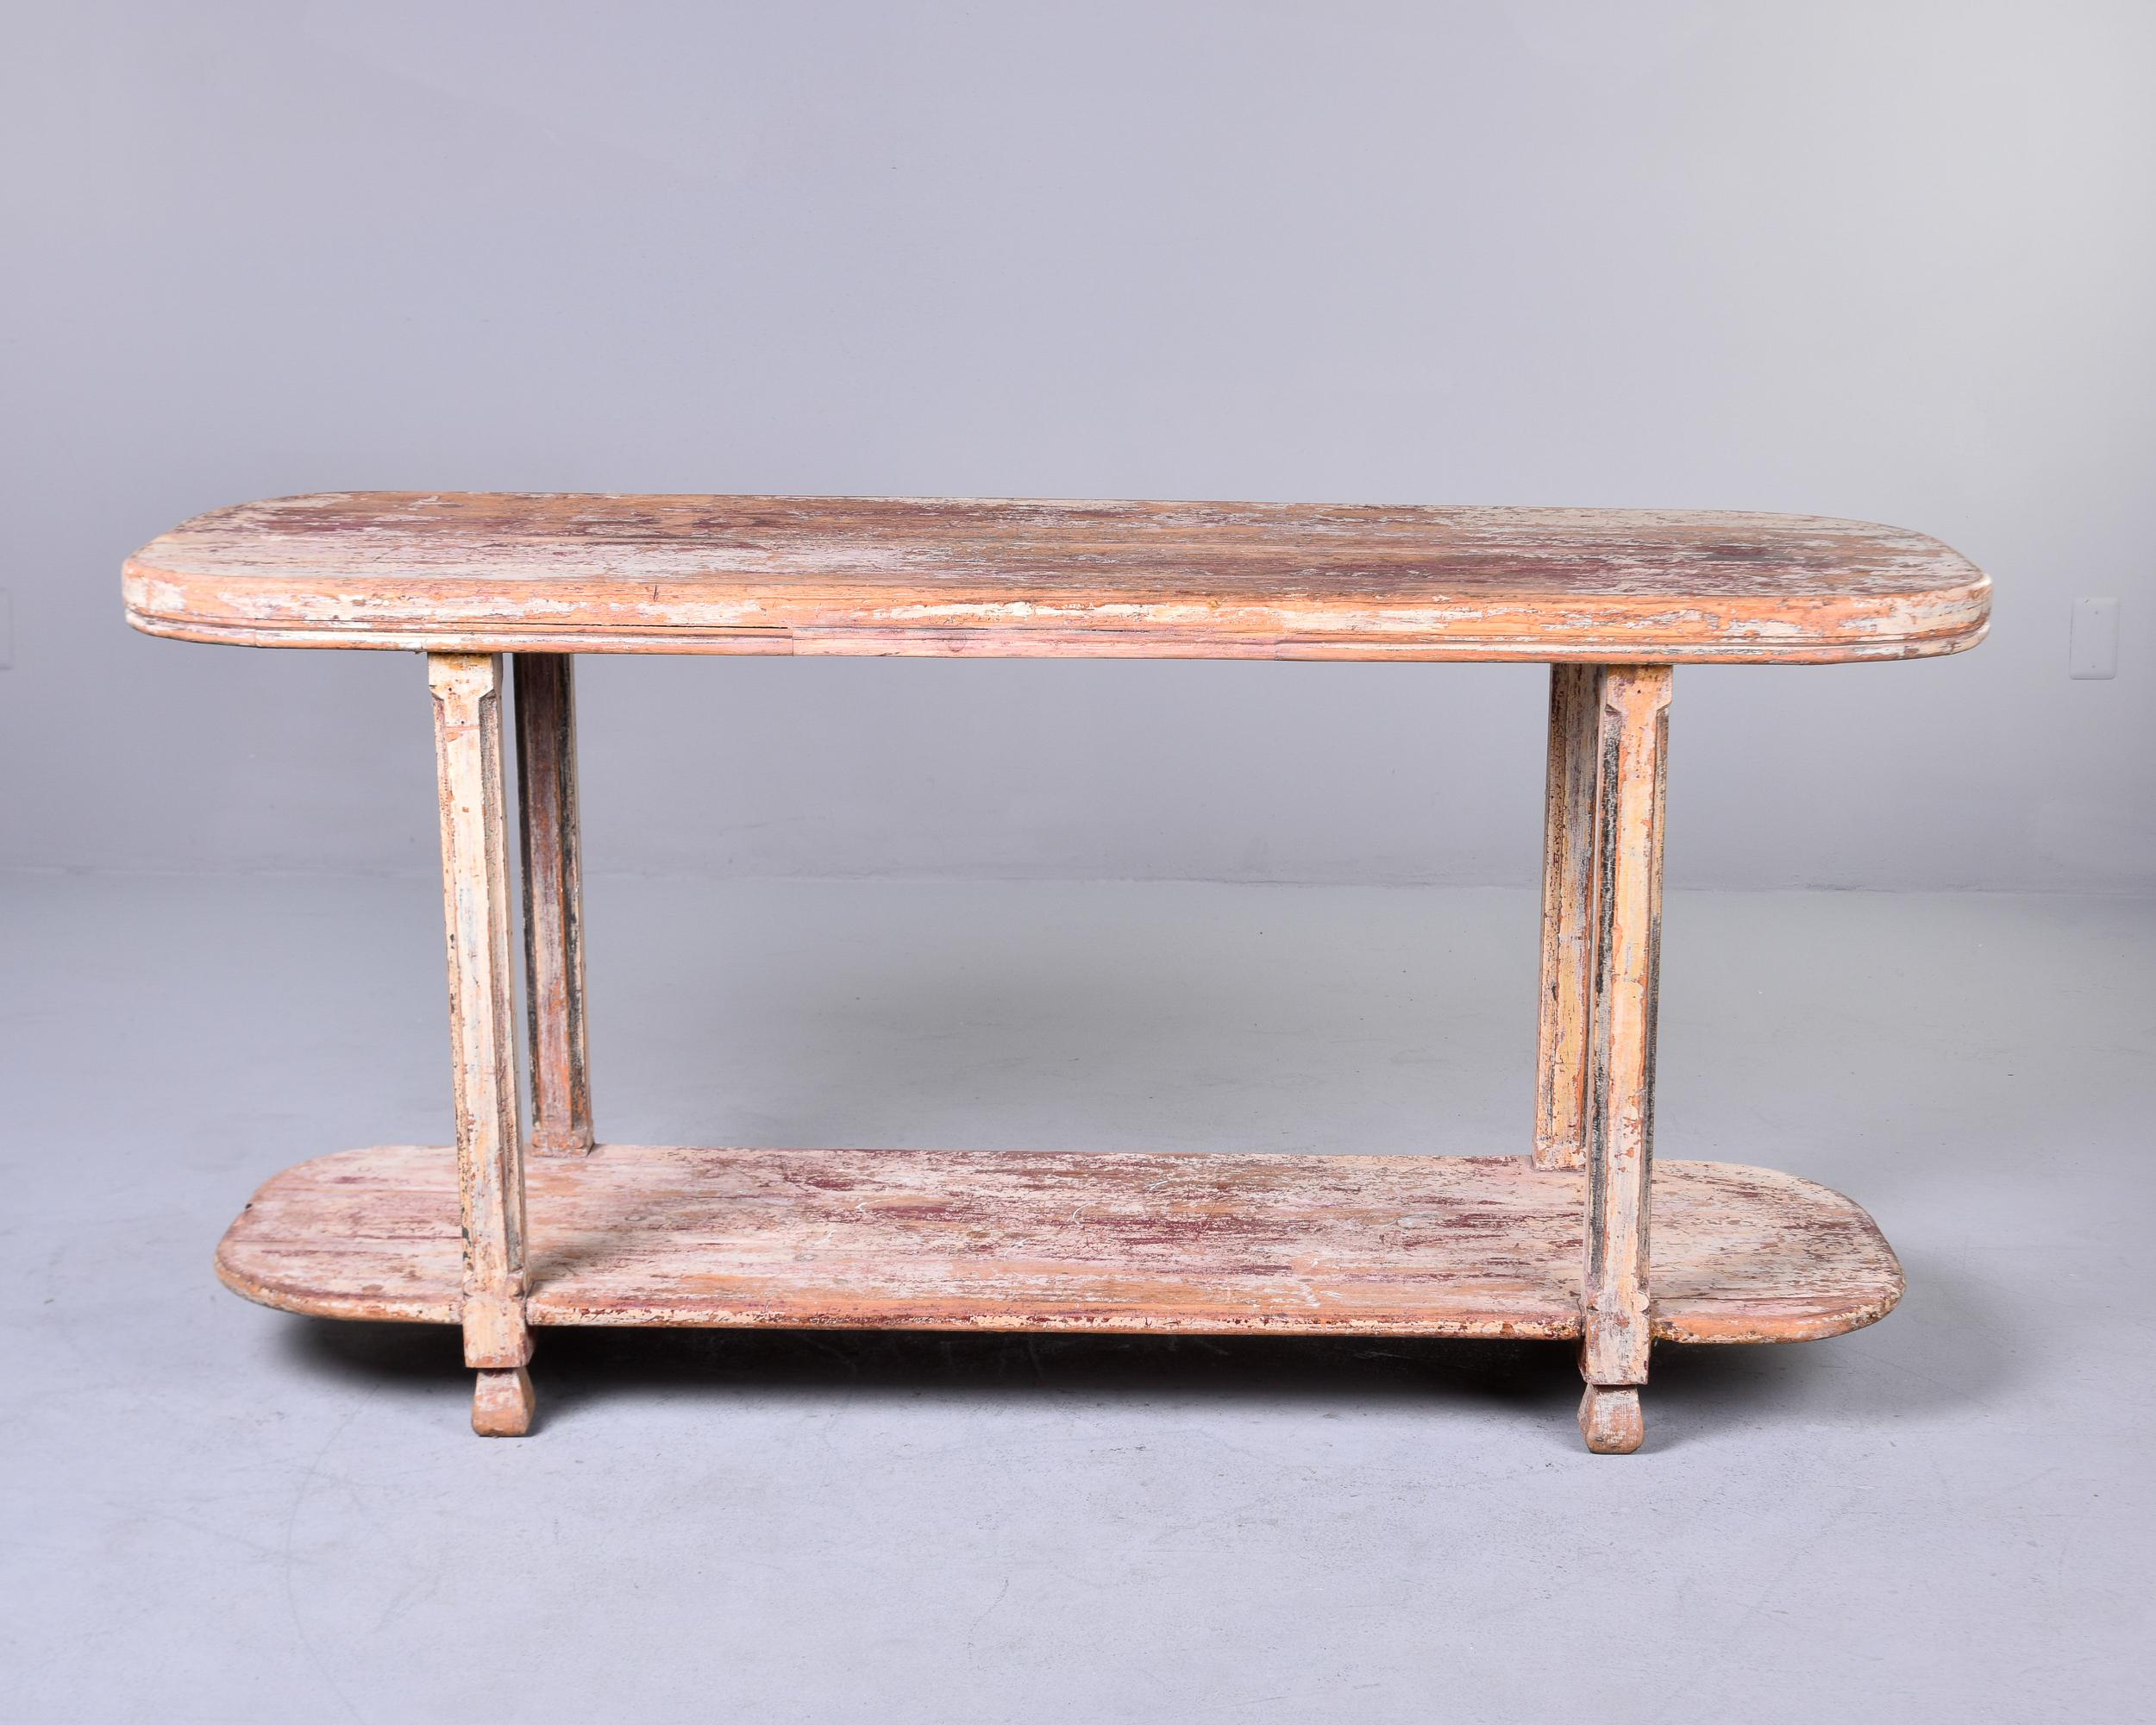 Painted Early 20th C Rustic French Two Tier Draper’s Table